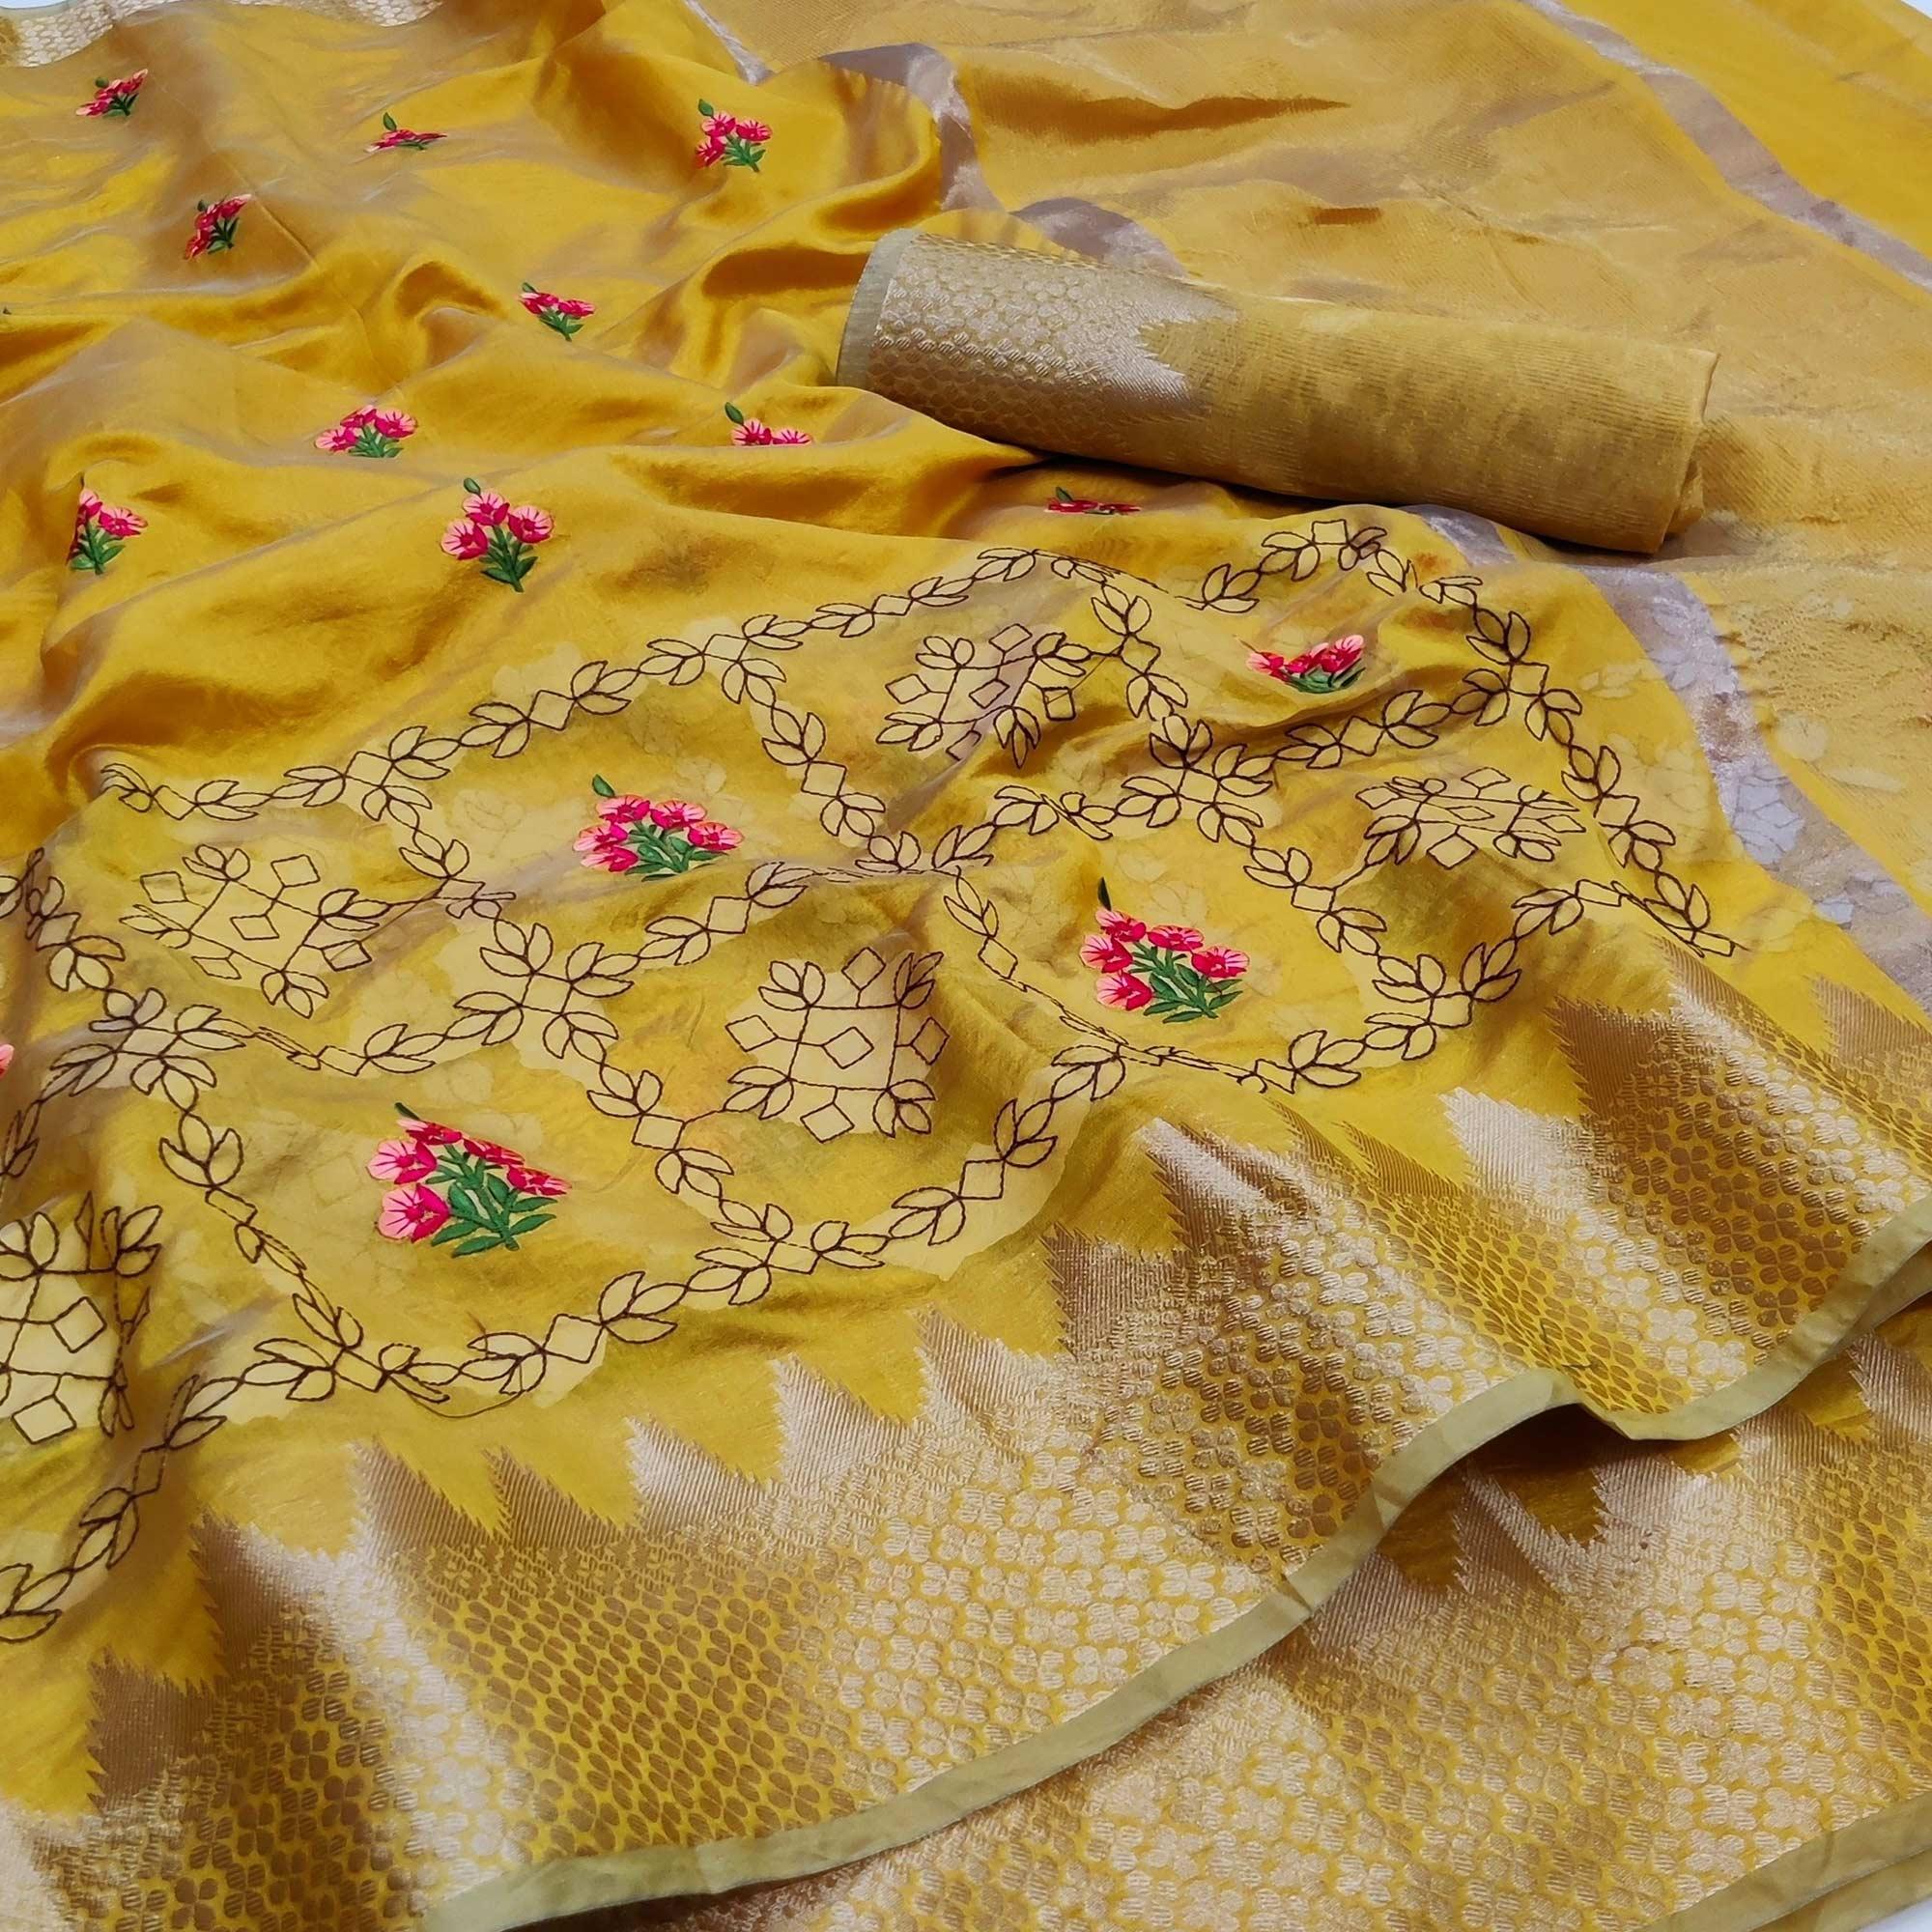 Gold Festive Wear Woven Organza Saree With Floral Embroidery Butta Work - Peachmode